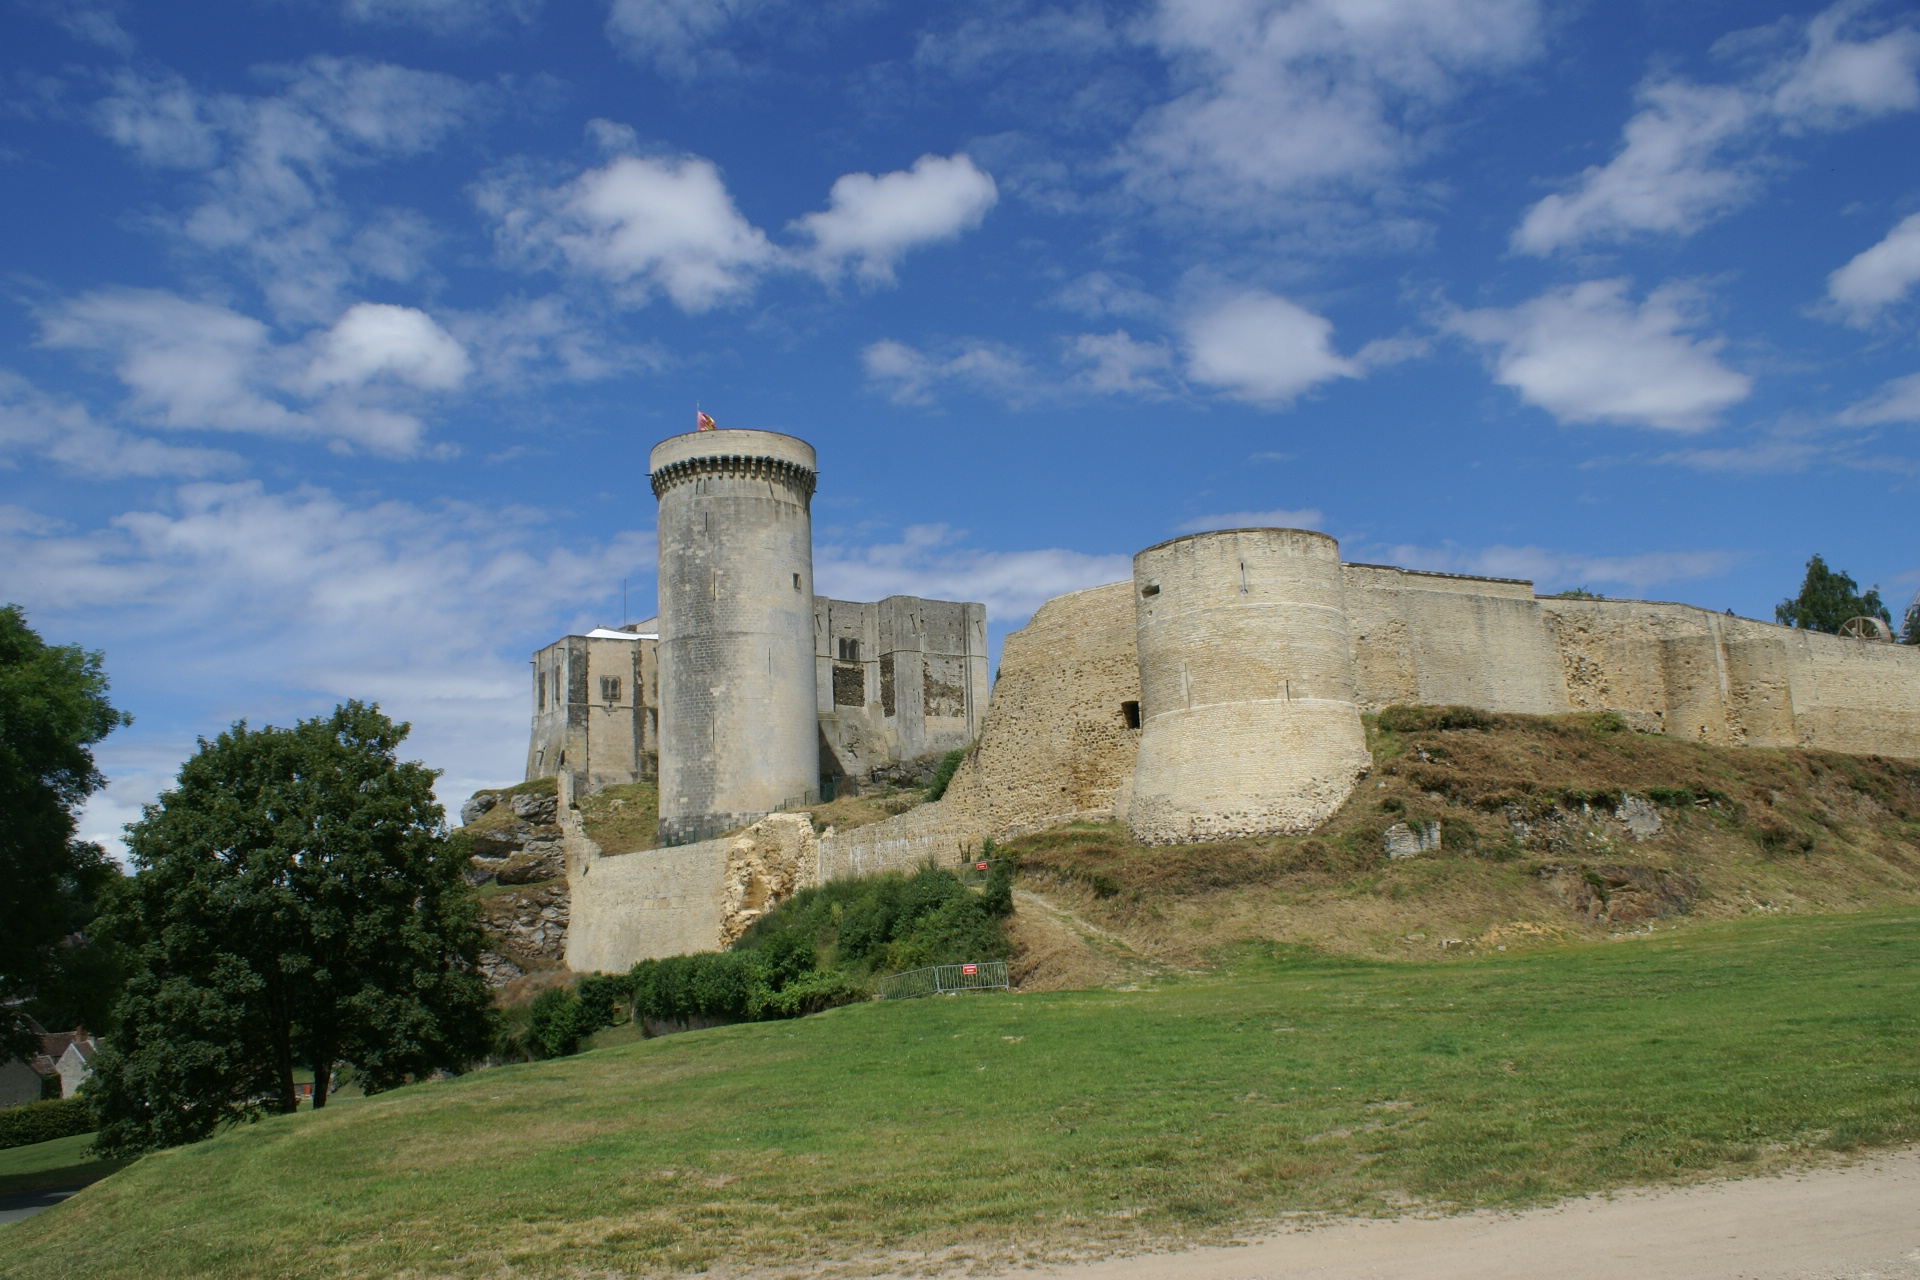 Chateau de Falaise, birthplace of William the Conqueror and host to a medieval fair in August